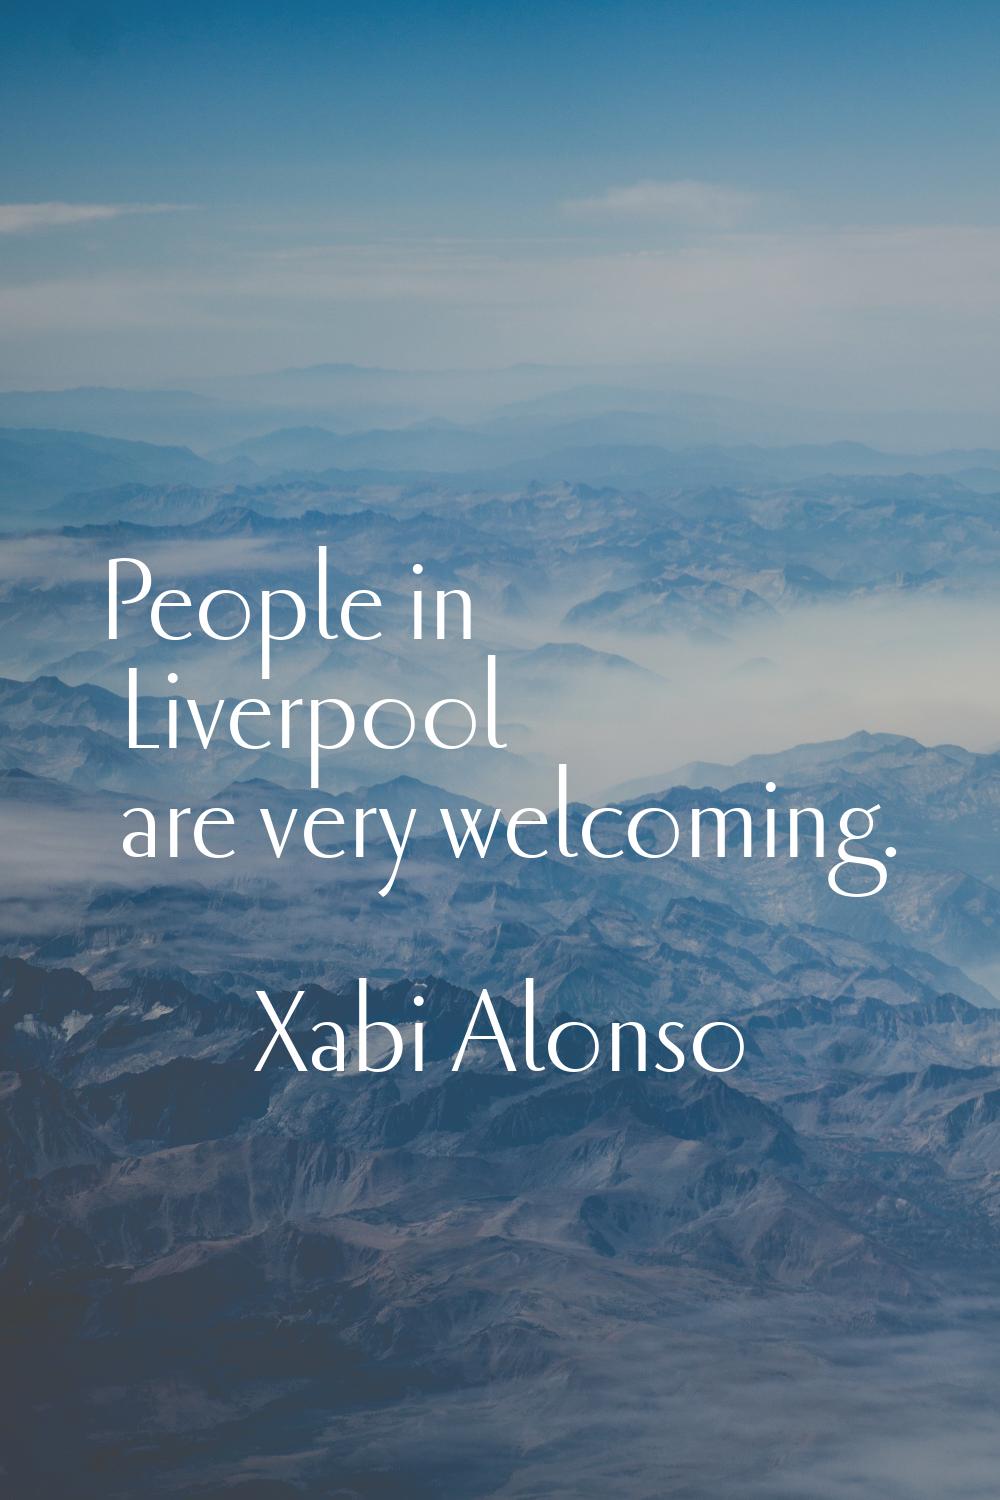 People in Liverpool are very welcoming.